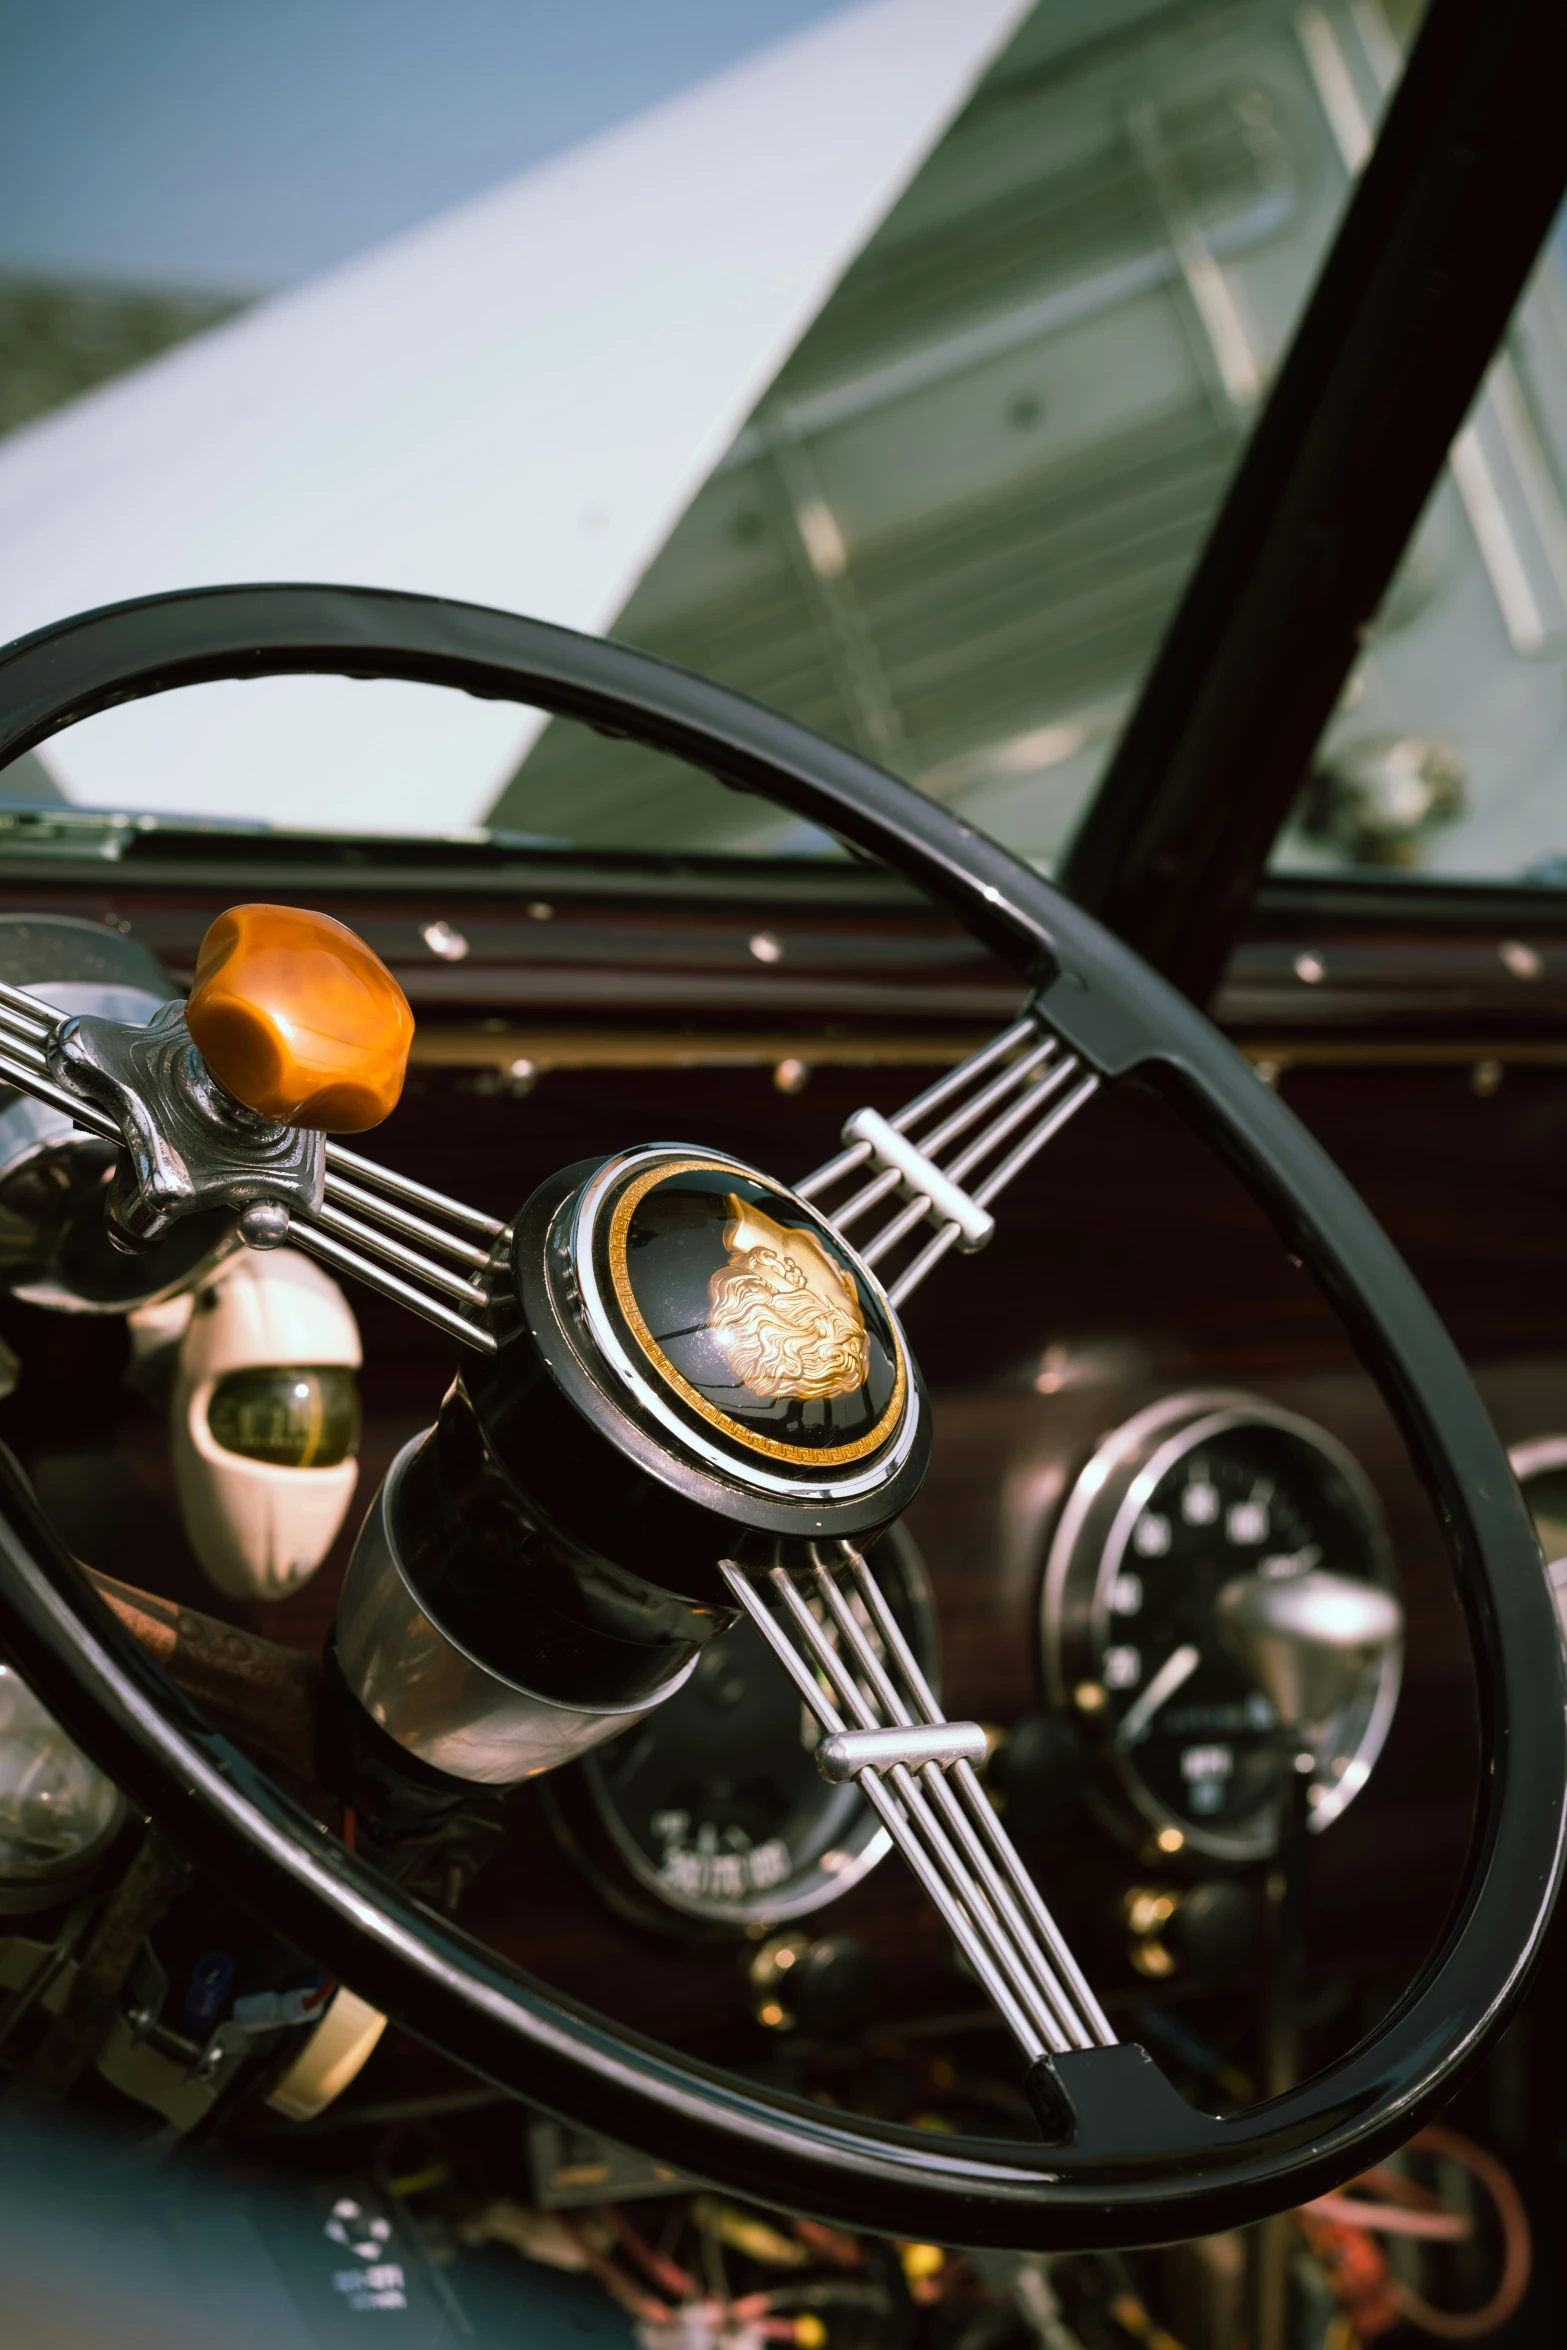 dashboard s of vintage car with steering wheel and instrument